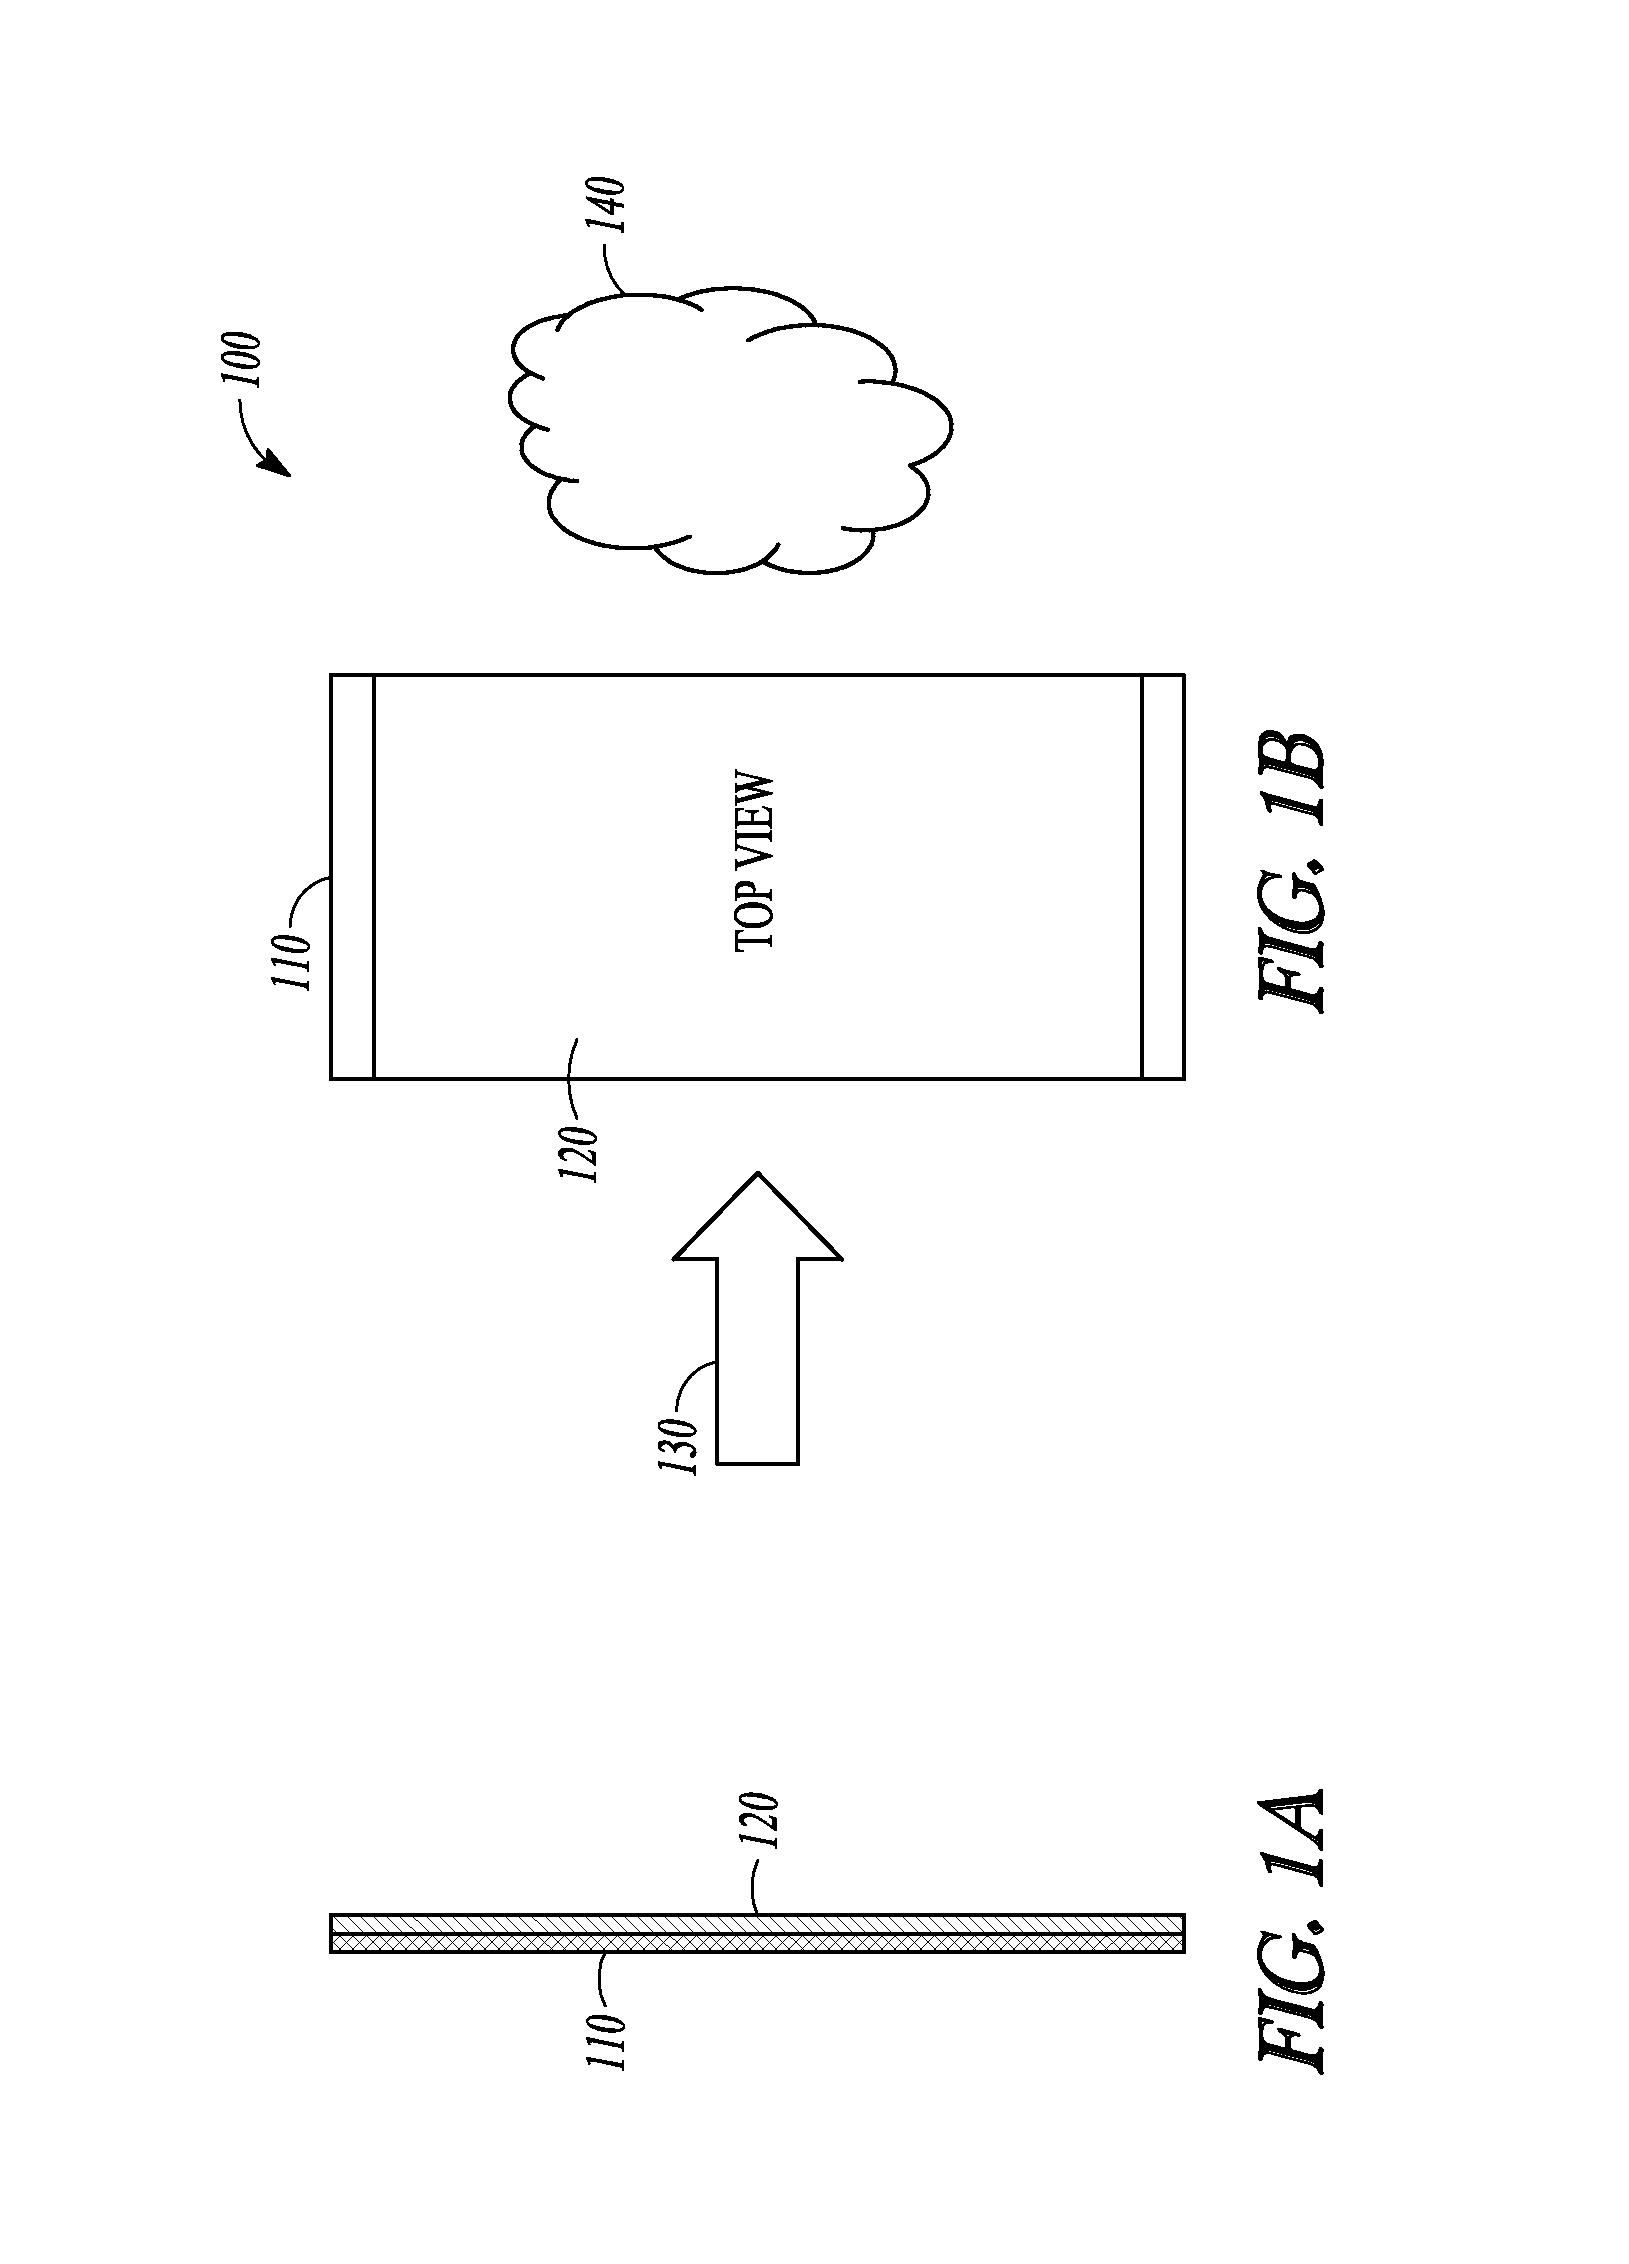 Drug delivery system and method